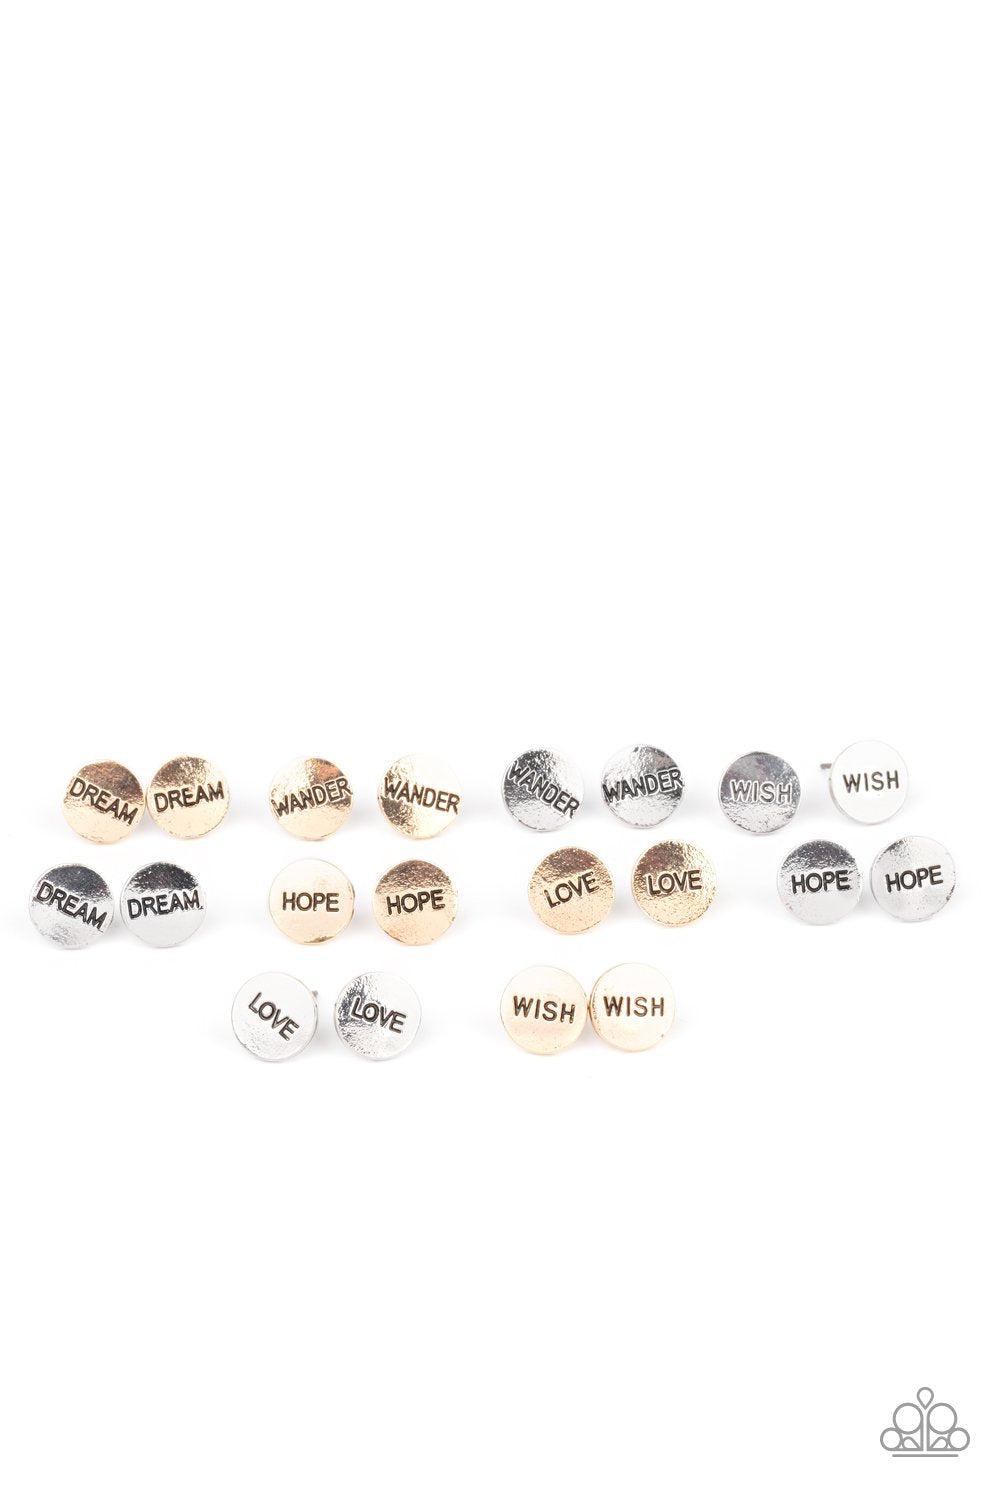 Starlet Shimmer Children's Gold and Silver Inspirational Post Earrings - Paparazzi Accessories (set of 10 pairs) - Full set -CarasShop.com - $5 Jewelry by Cara Jewels